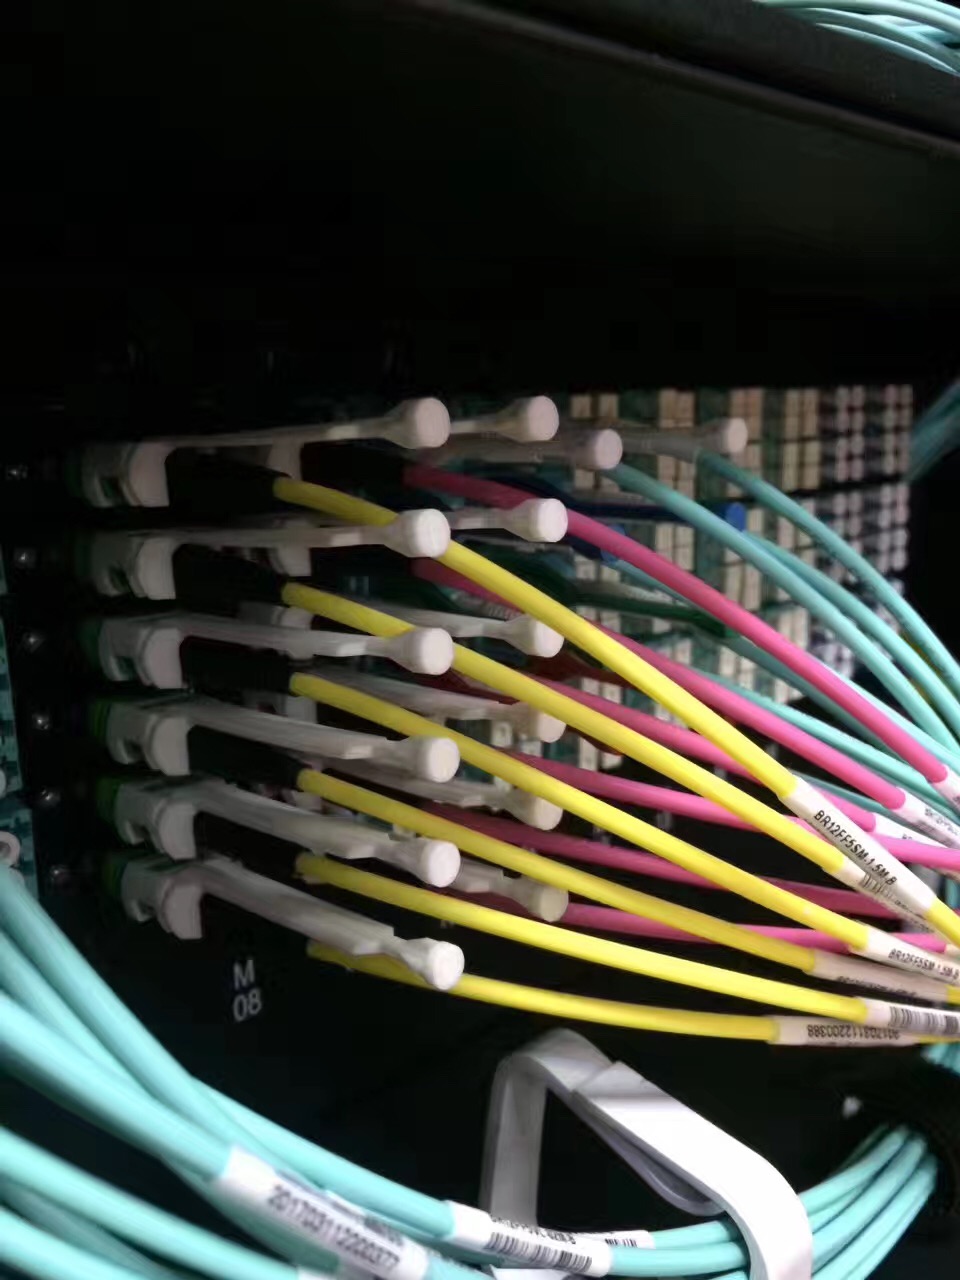 New Fiber Optic Cable Could Make the Internet 100 Times Faster